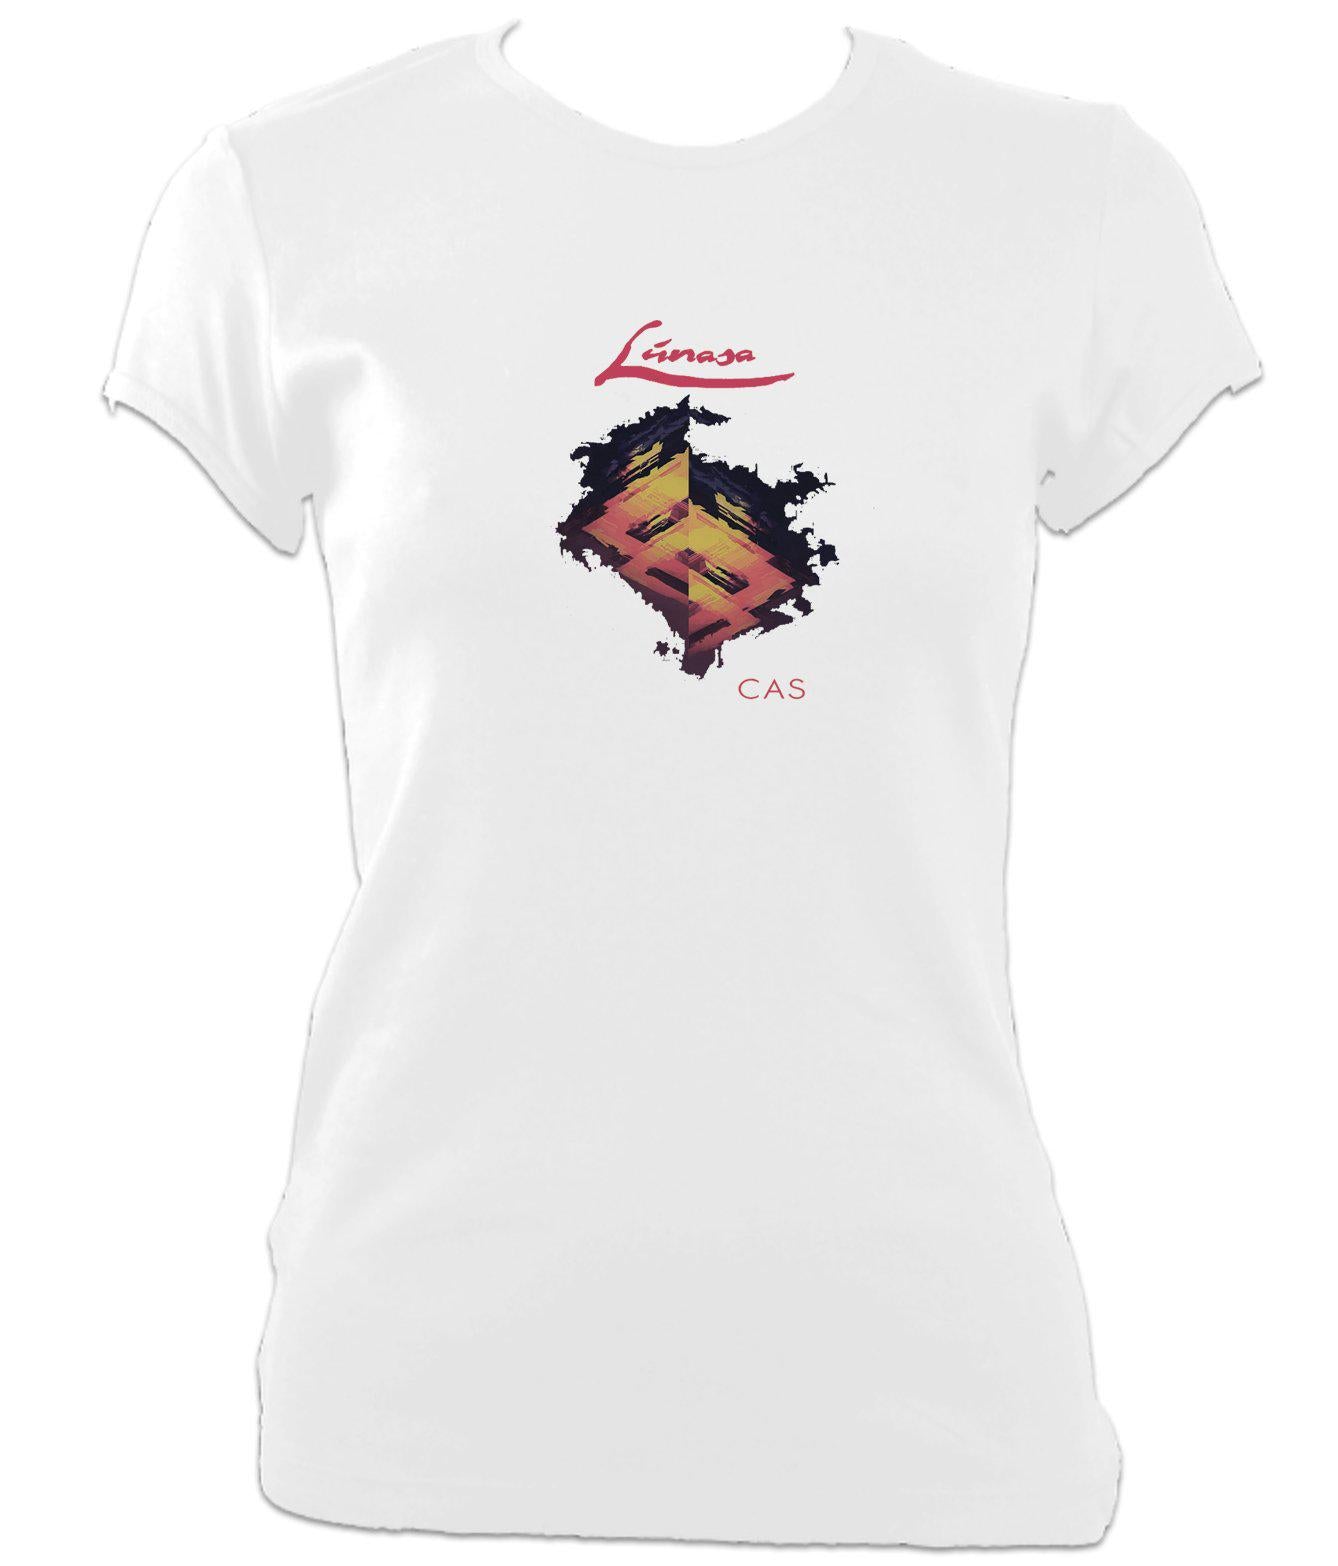 Lúnasa "Cas" Ladies Fitted T-Shirt